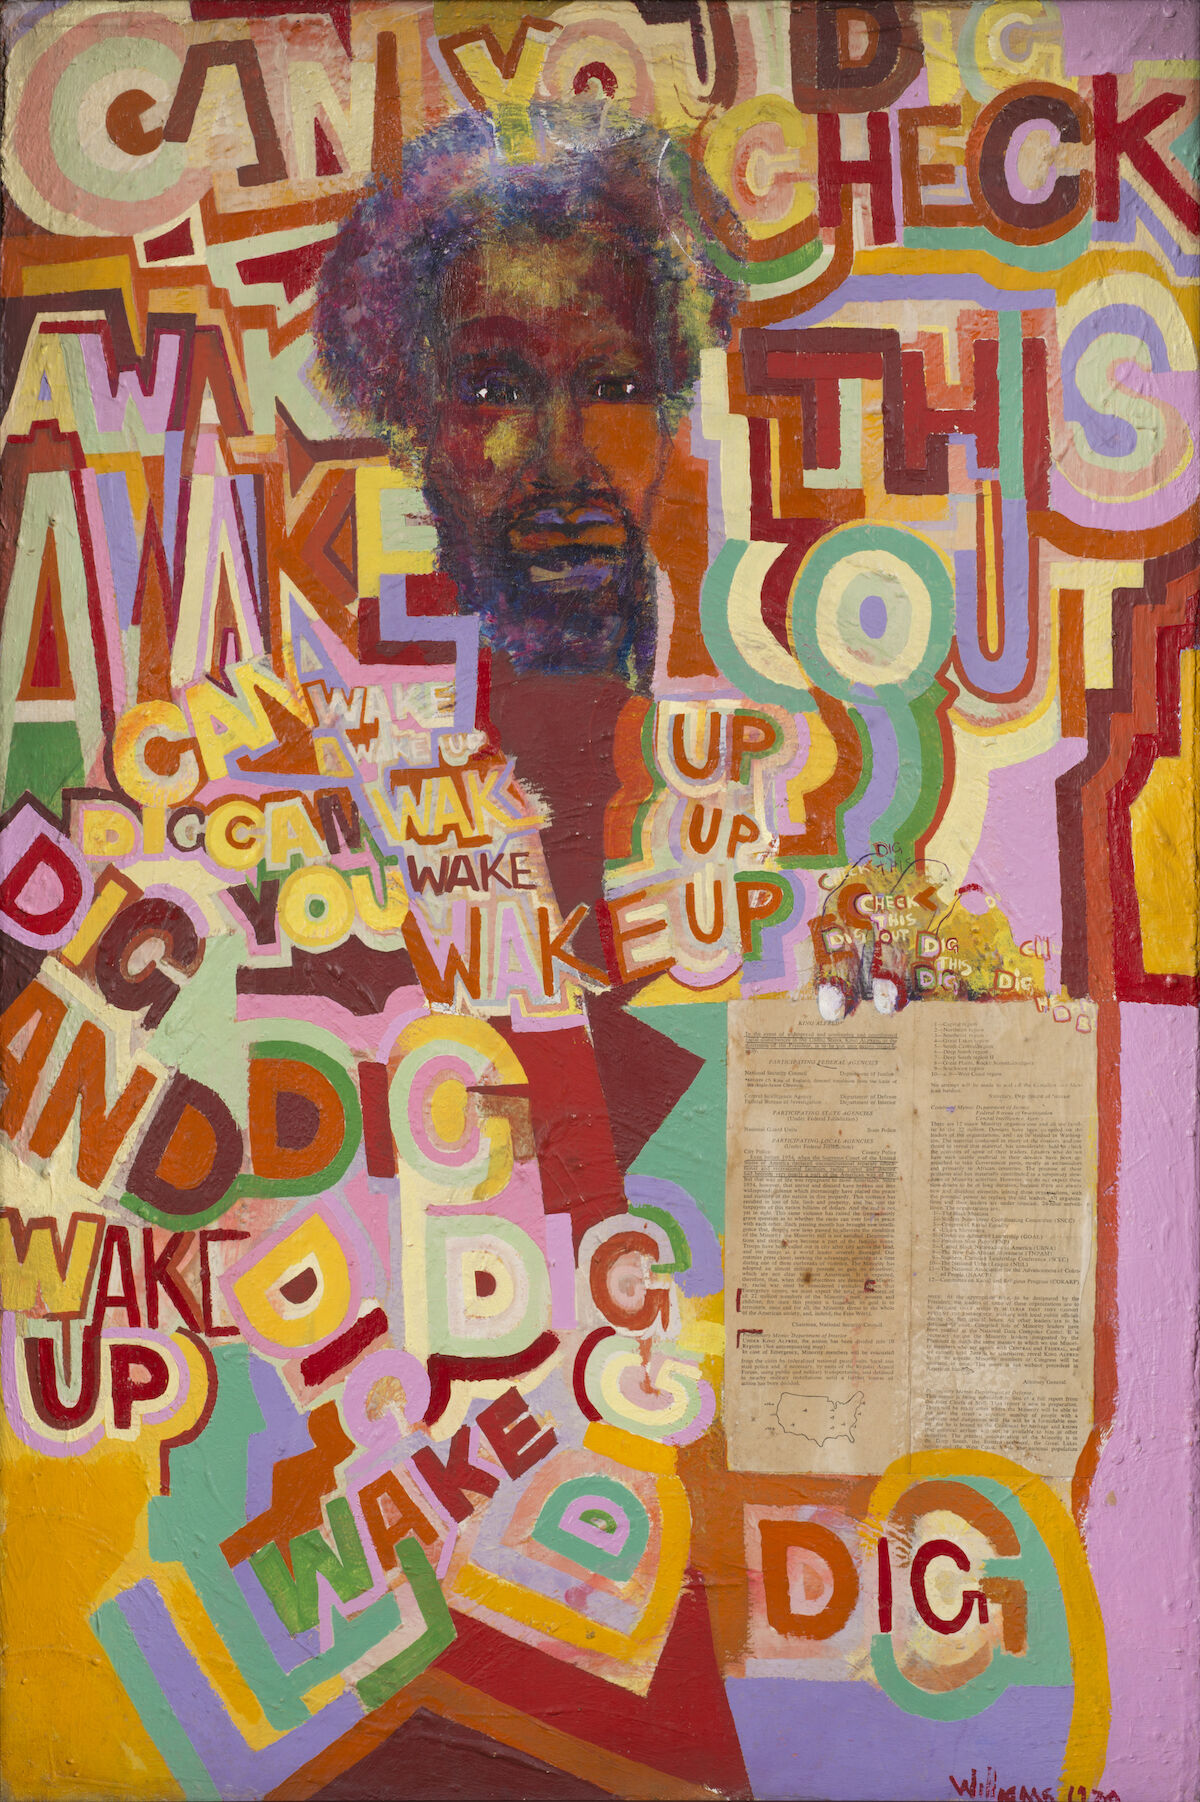 Work by Gerald Williams, founding member of AfriCOBRA. Image courtesy of the artist and Kavi Gupta Gallery, Chicago.